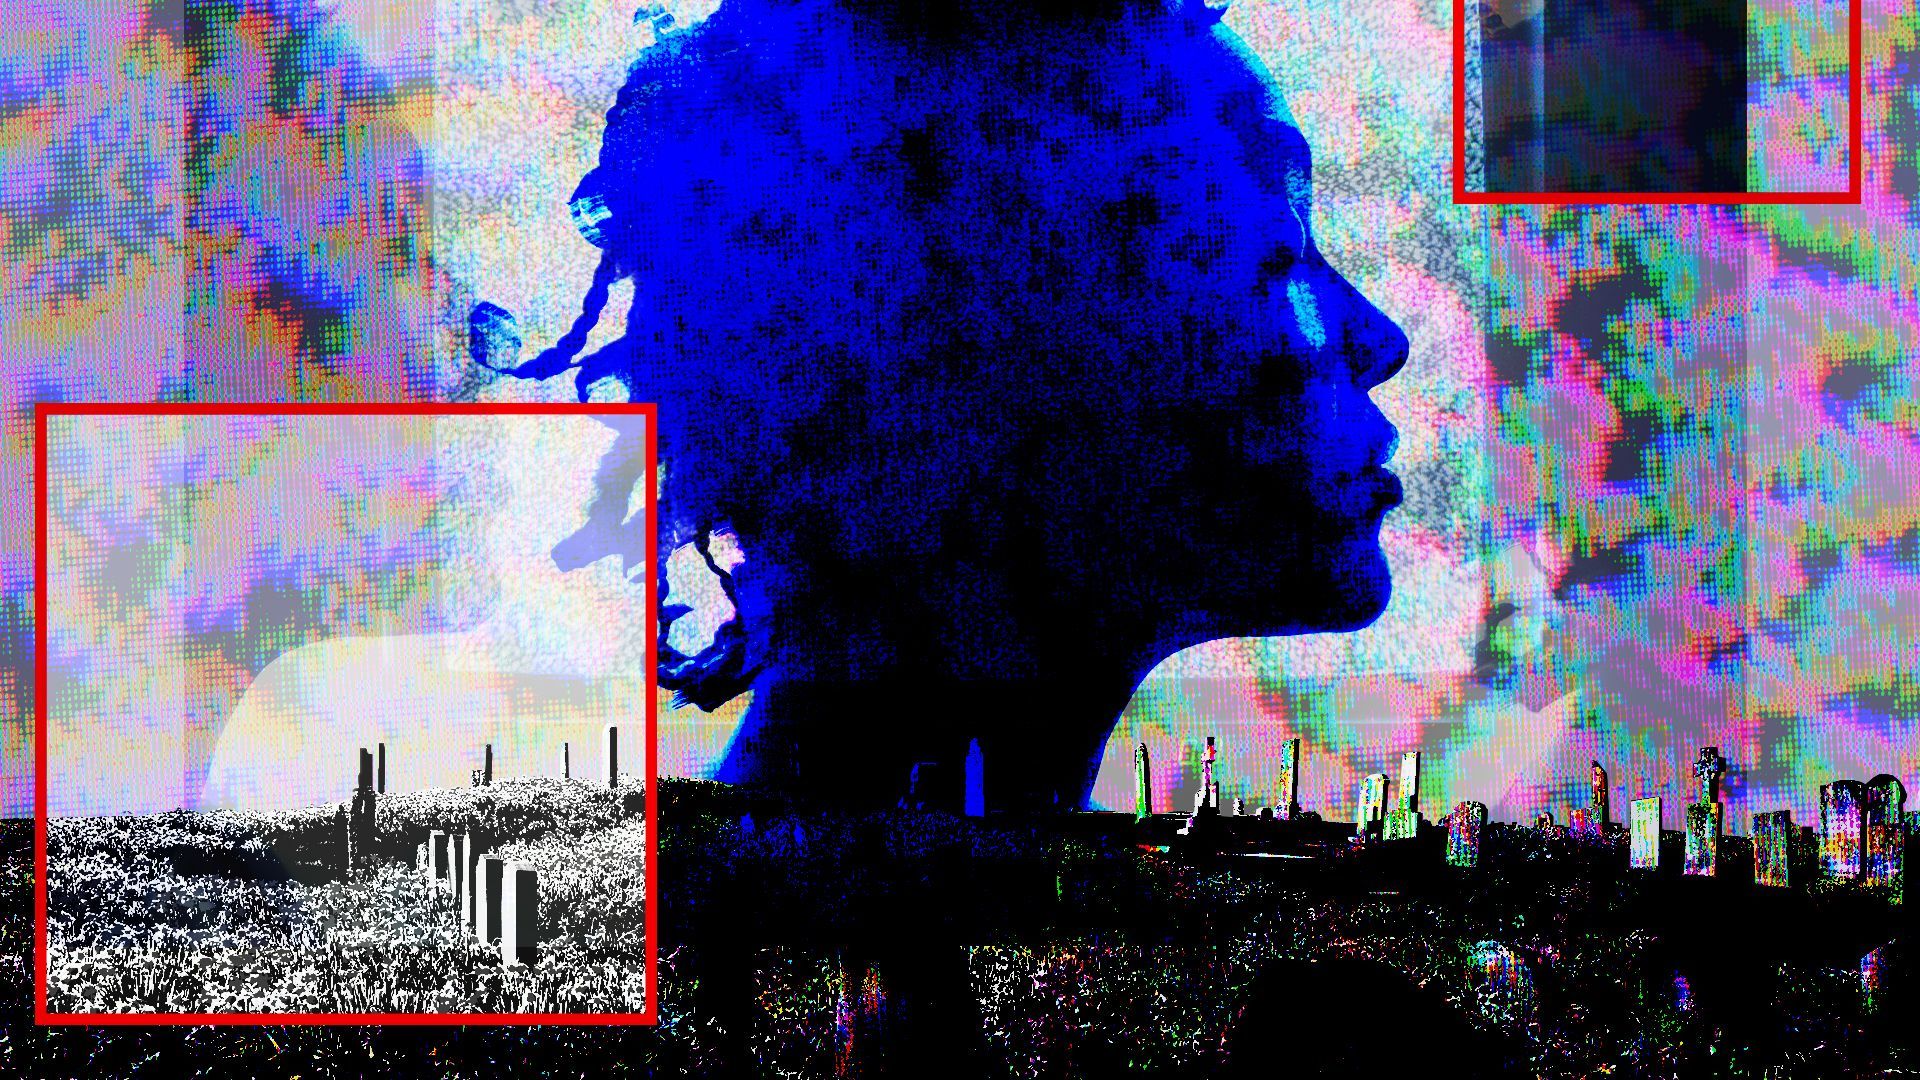 Illustration of a pixelated, distorted image of a person's face placed above a cemetery.